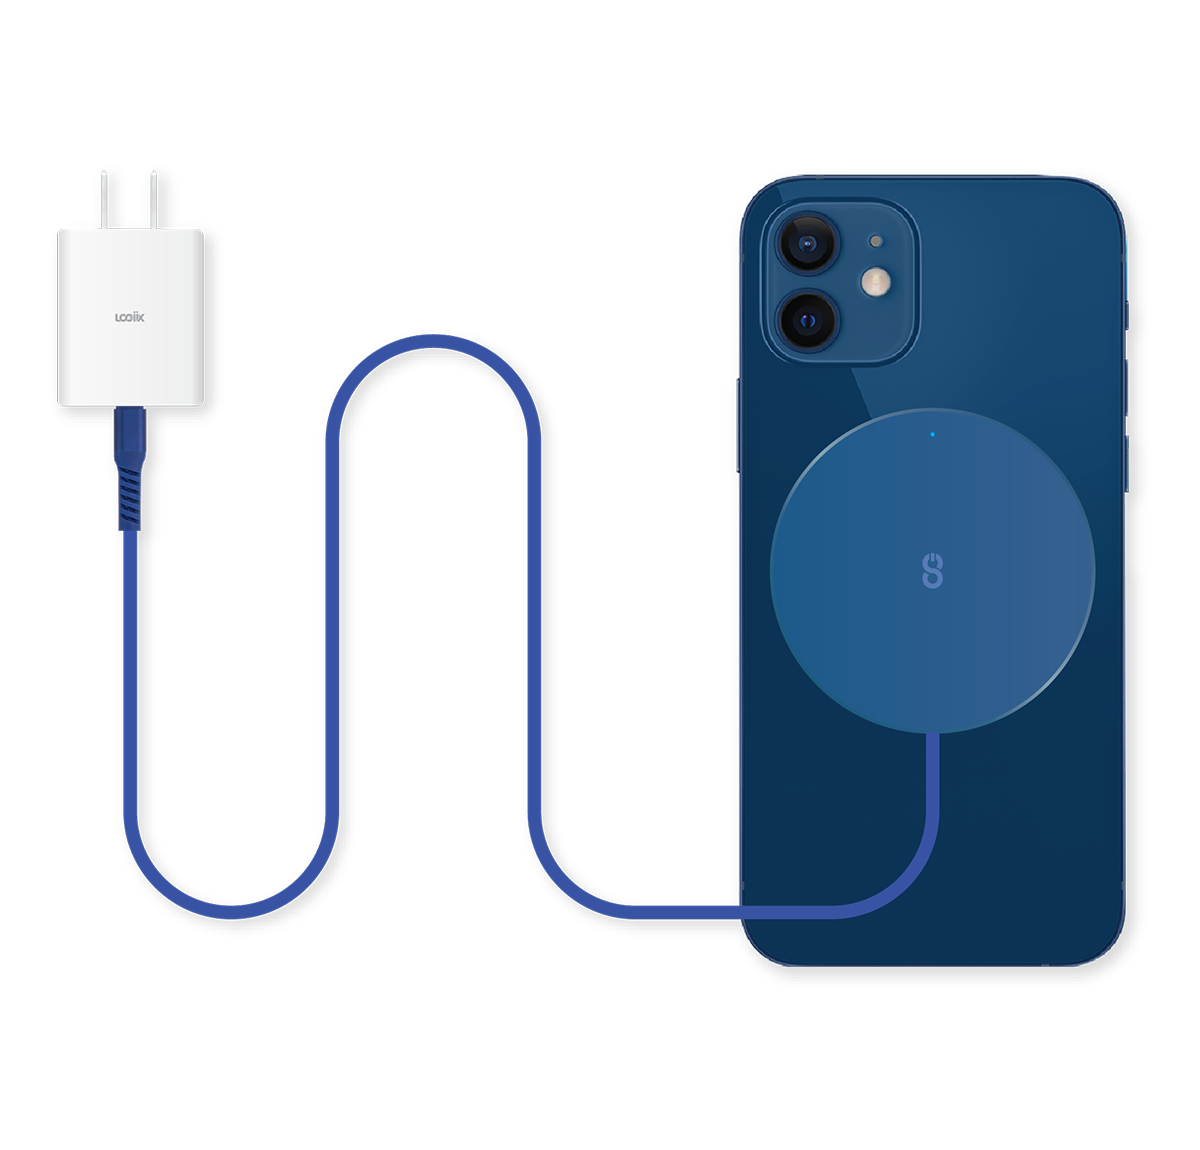 Blue MagSafe compatible fast-charging magnetic charger with built-in 1.5m USB-C cable charging a blue iPhone 12 